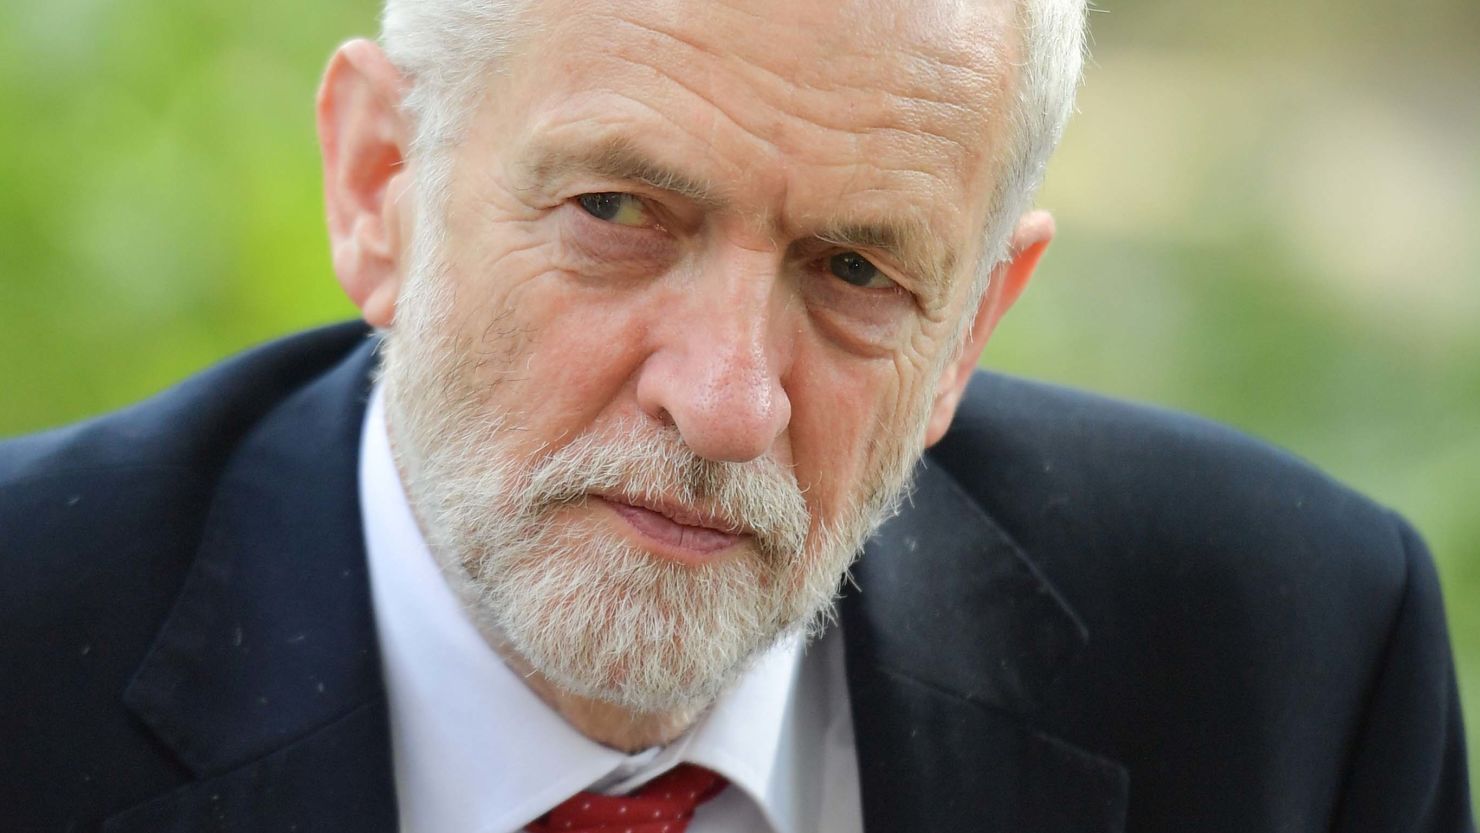 Britain's opposition Labour Party leader, Jeremy Corbyn, says his party would back Remain.